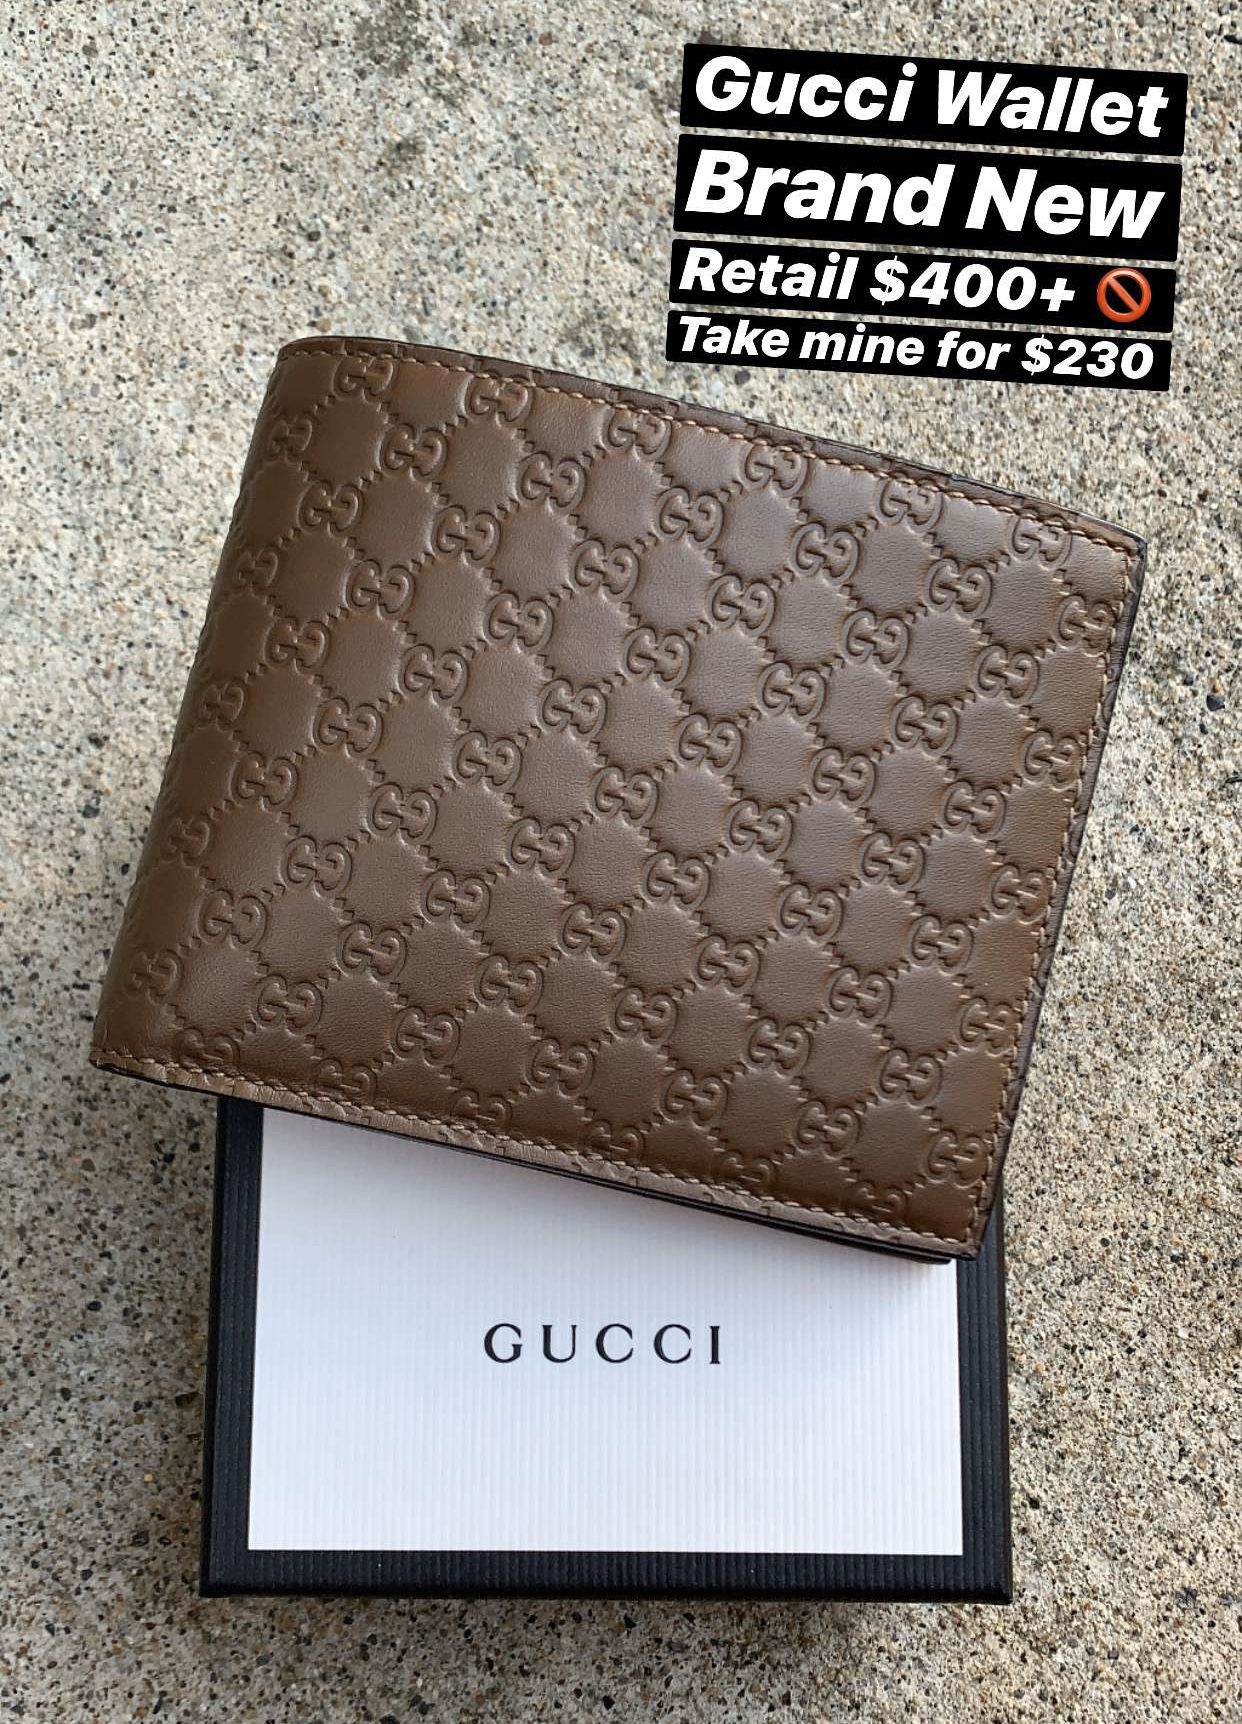 Brown Leather Gucci Wallet - Brand New